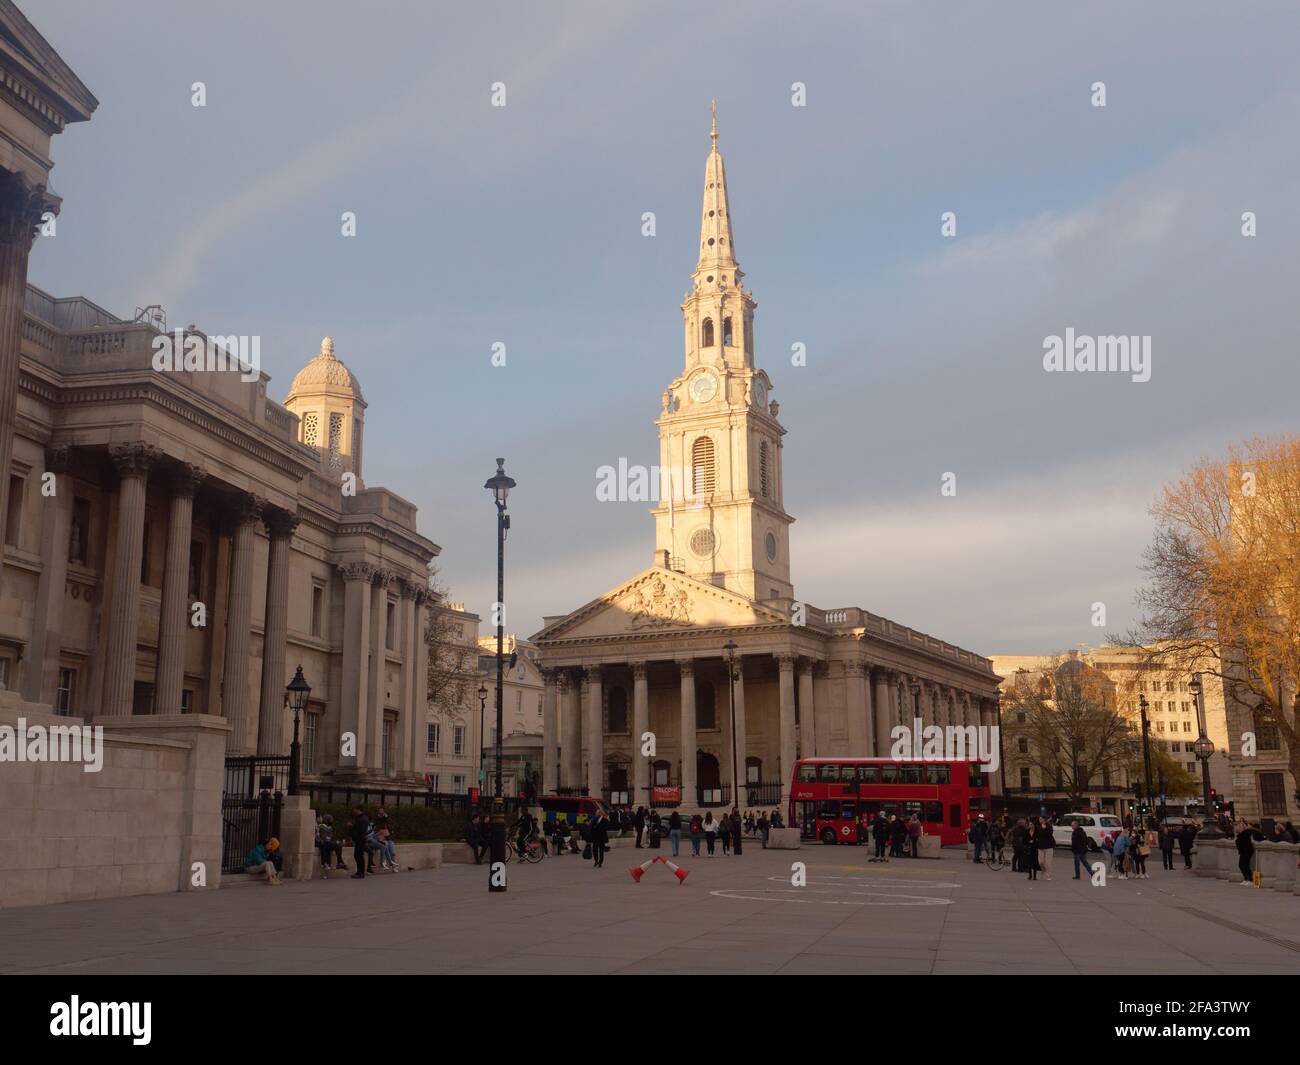 London, Greater London, England - Apr 17 2021: Trafalgar Sq with St Martin in the Fields Church middle and National Gallery left. Stock Photo